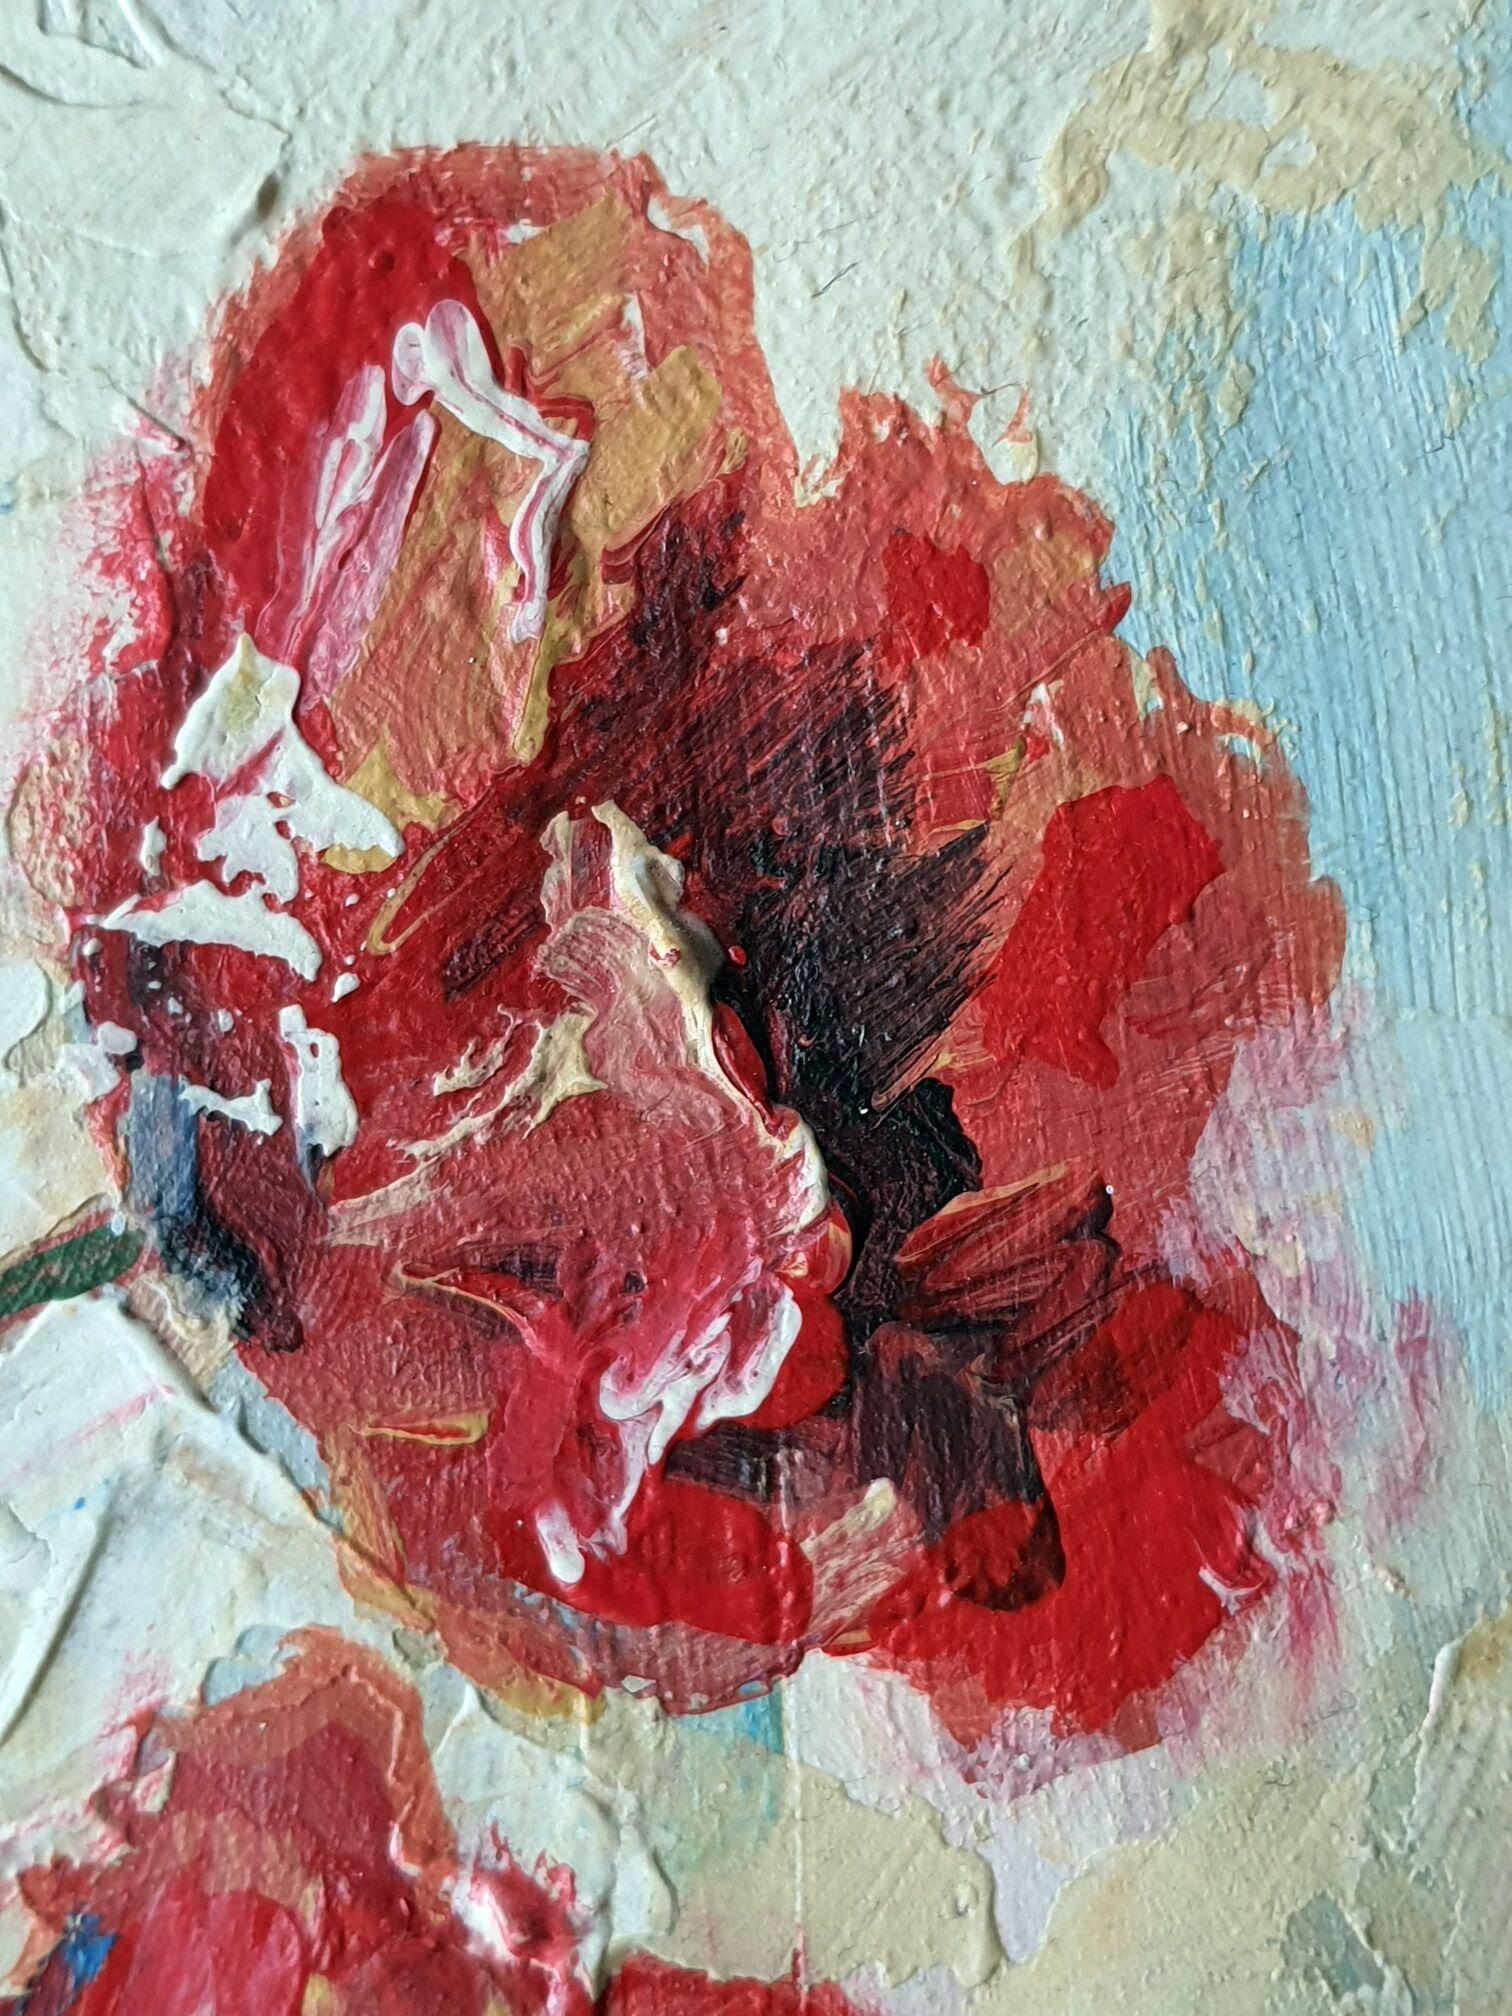 In crafting this piece, I've poured vibrant emotions into each stroke of acrylic and oil, seeking to capture the transient beauty of life through the expressionist and impressionist styles. The lush peonies burst with joy, symbolizing the radiance